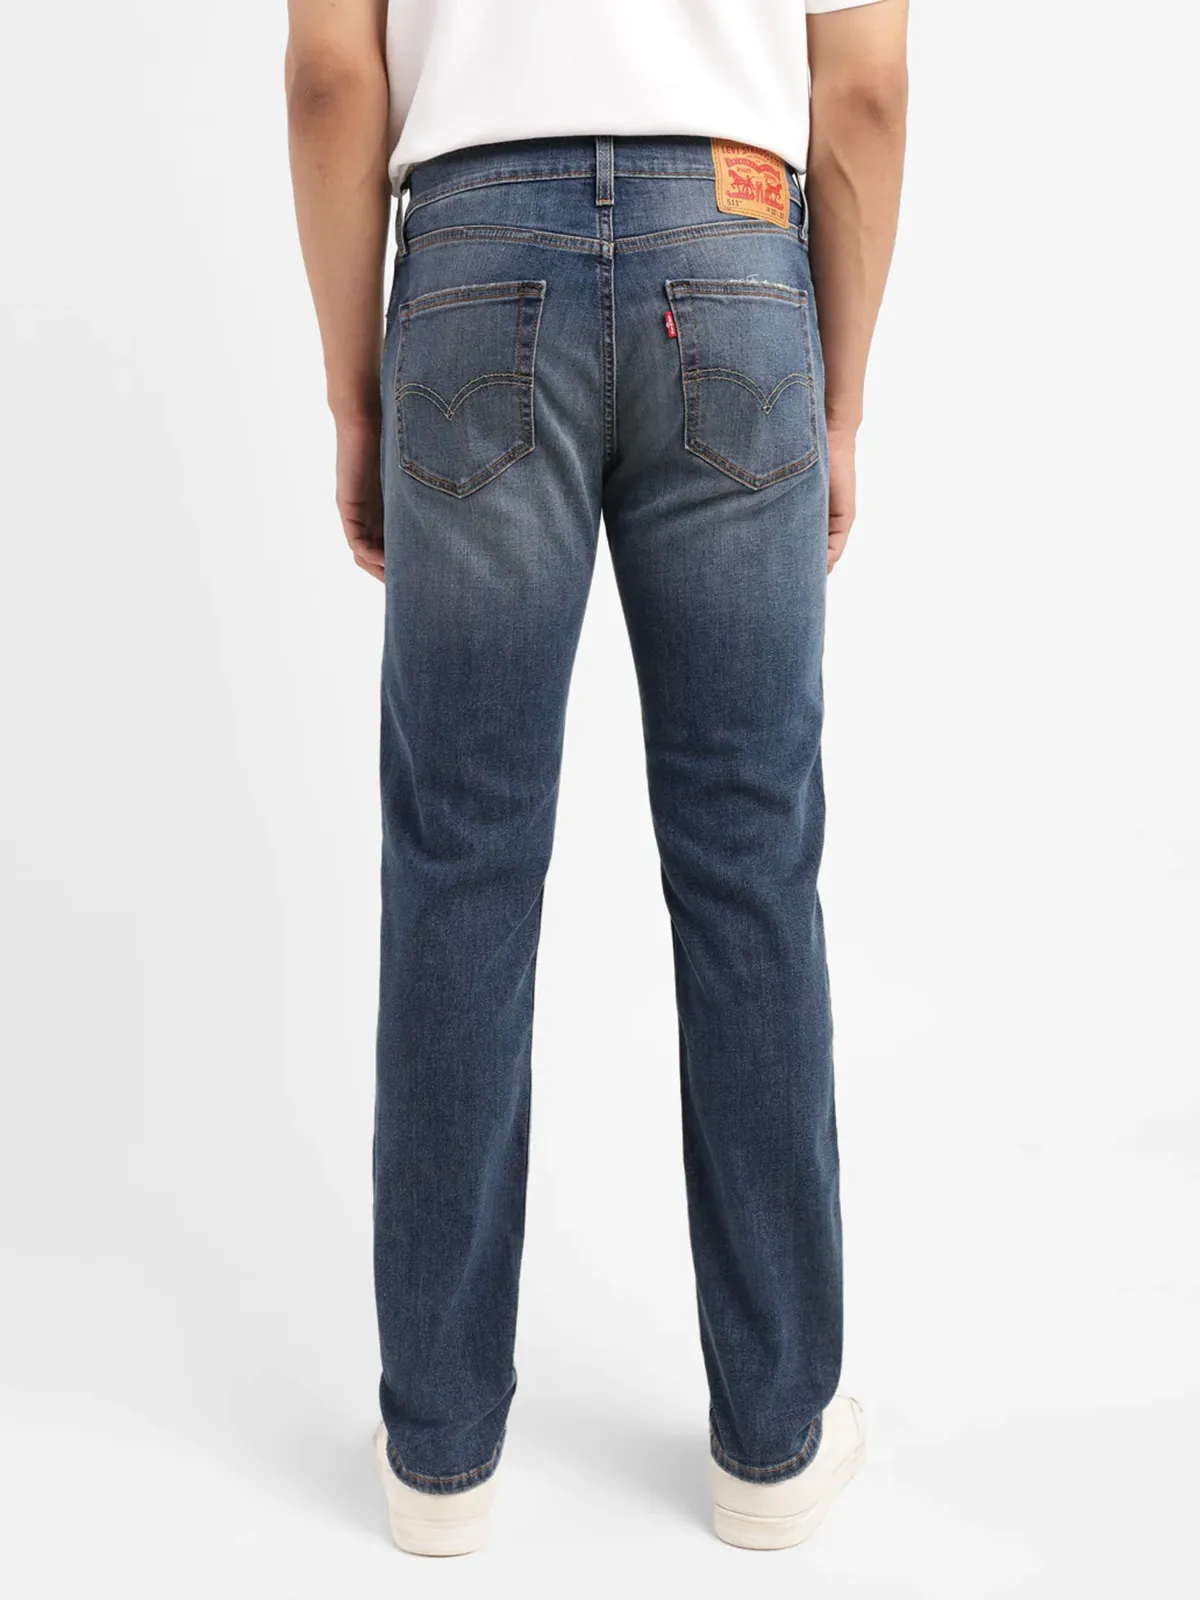 Levis 511 slim fit washed jeans in blue